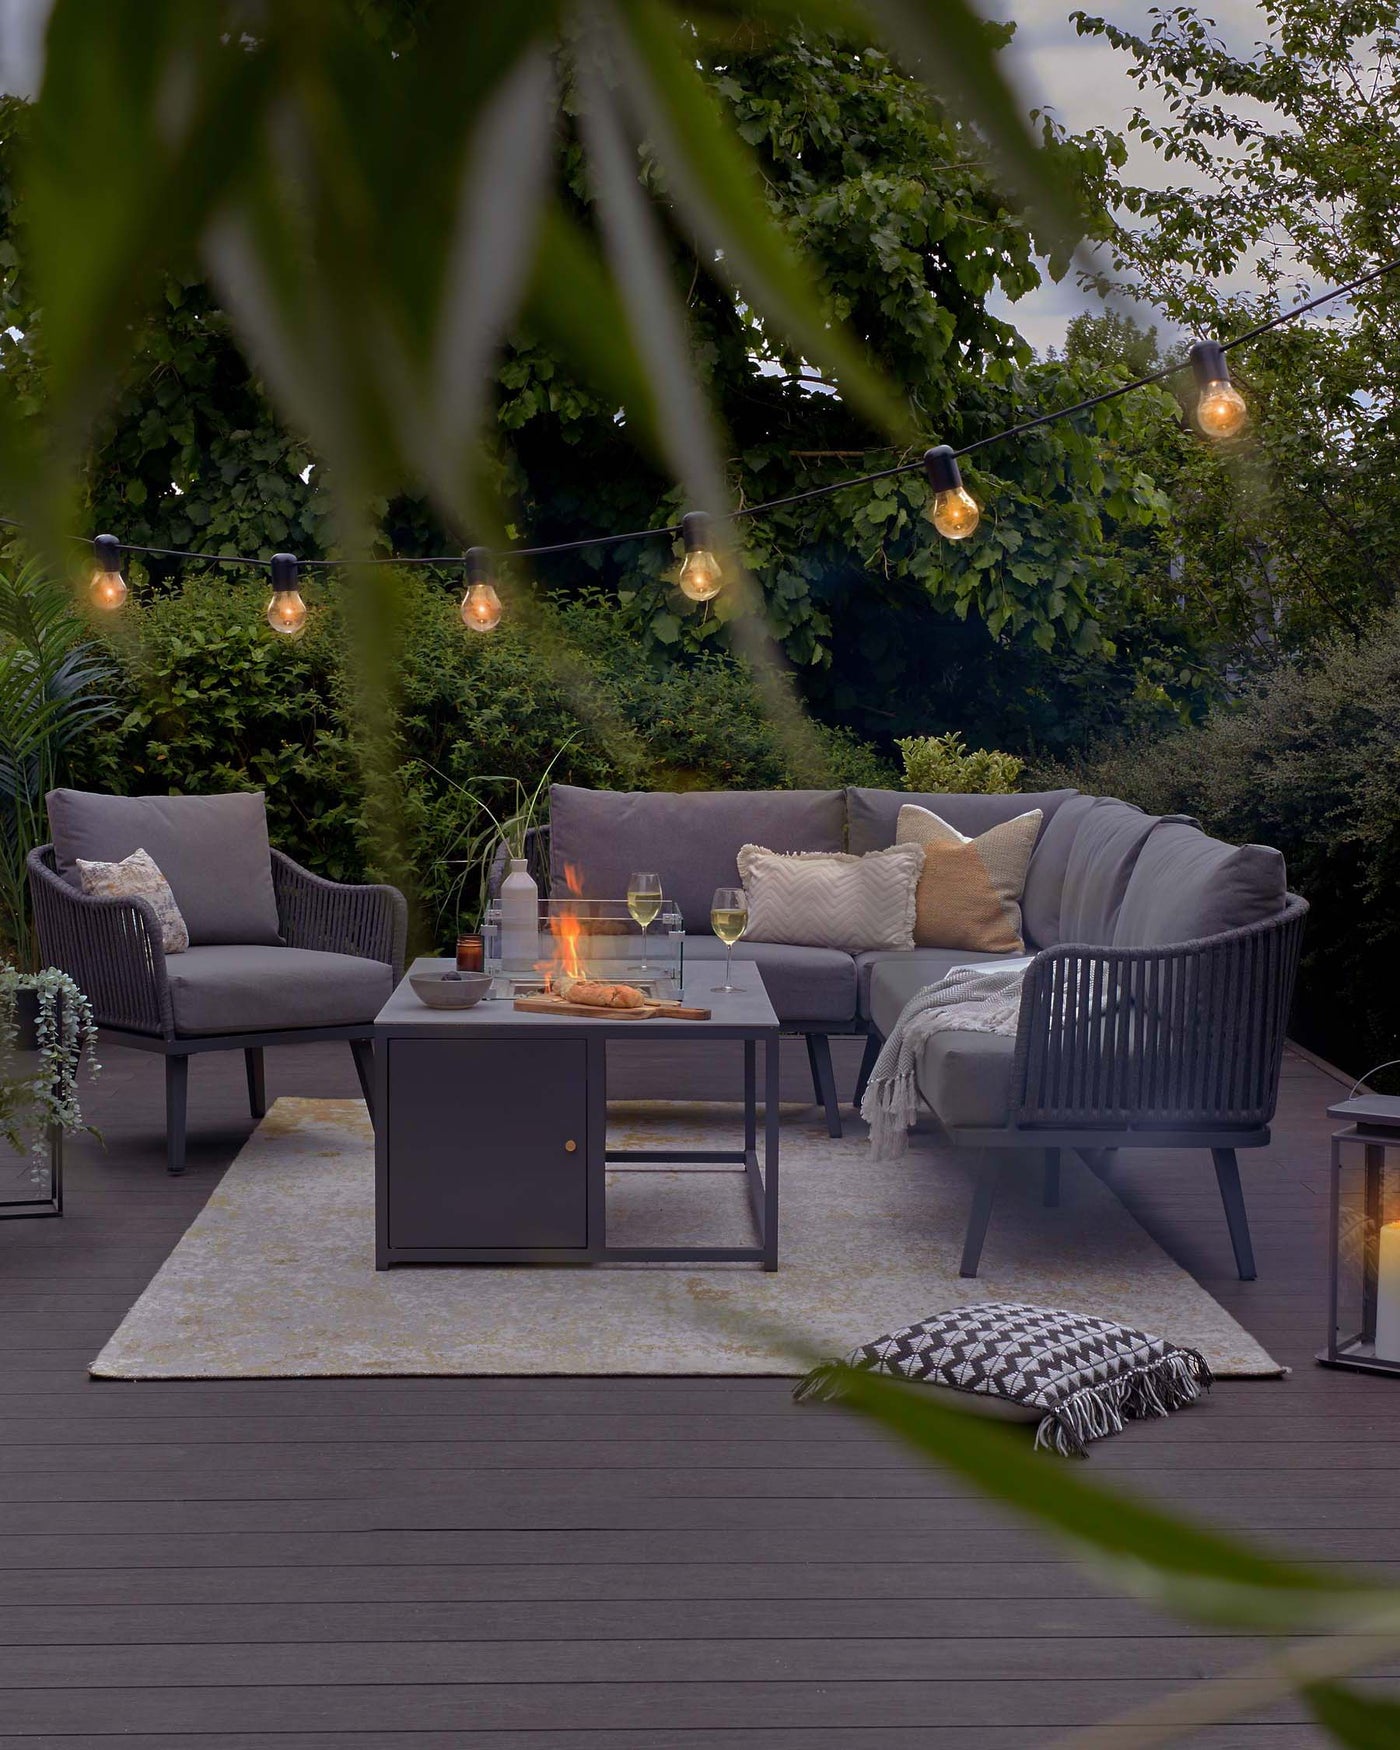 Outdoor furniture set on a wooden deck, including a dark grey sectional sofa with plush cushions, complemented by matching armchairs. A rectangular metal fire pit table sits at the centre, flanked by glassware. Soft lighting from overhead string bulbs adds a cosy ambiance. An off-white patterned area rug lies beneath the set, and accessories like a throw blanket and decorative pillows enhance the overall comfort. Transparent lanterns contribute to the evening's tranquil mood.